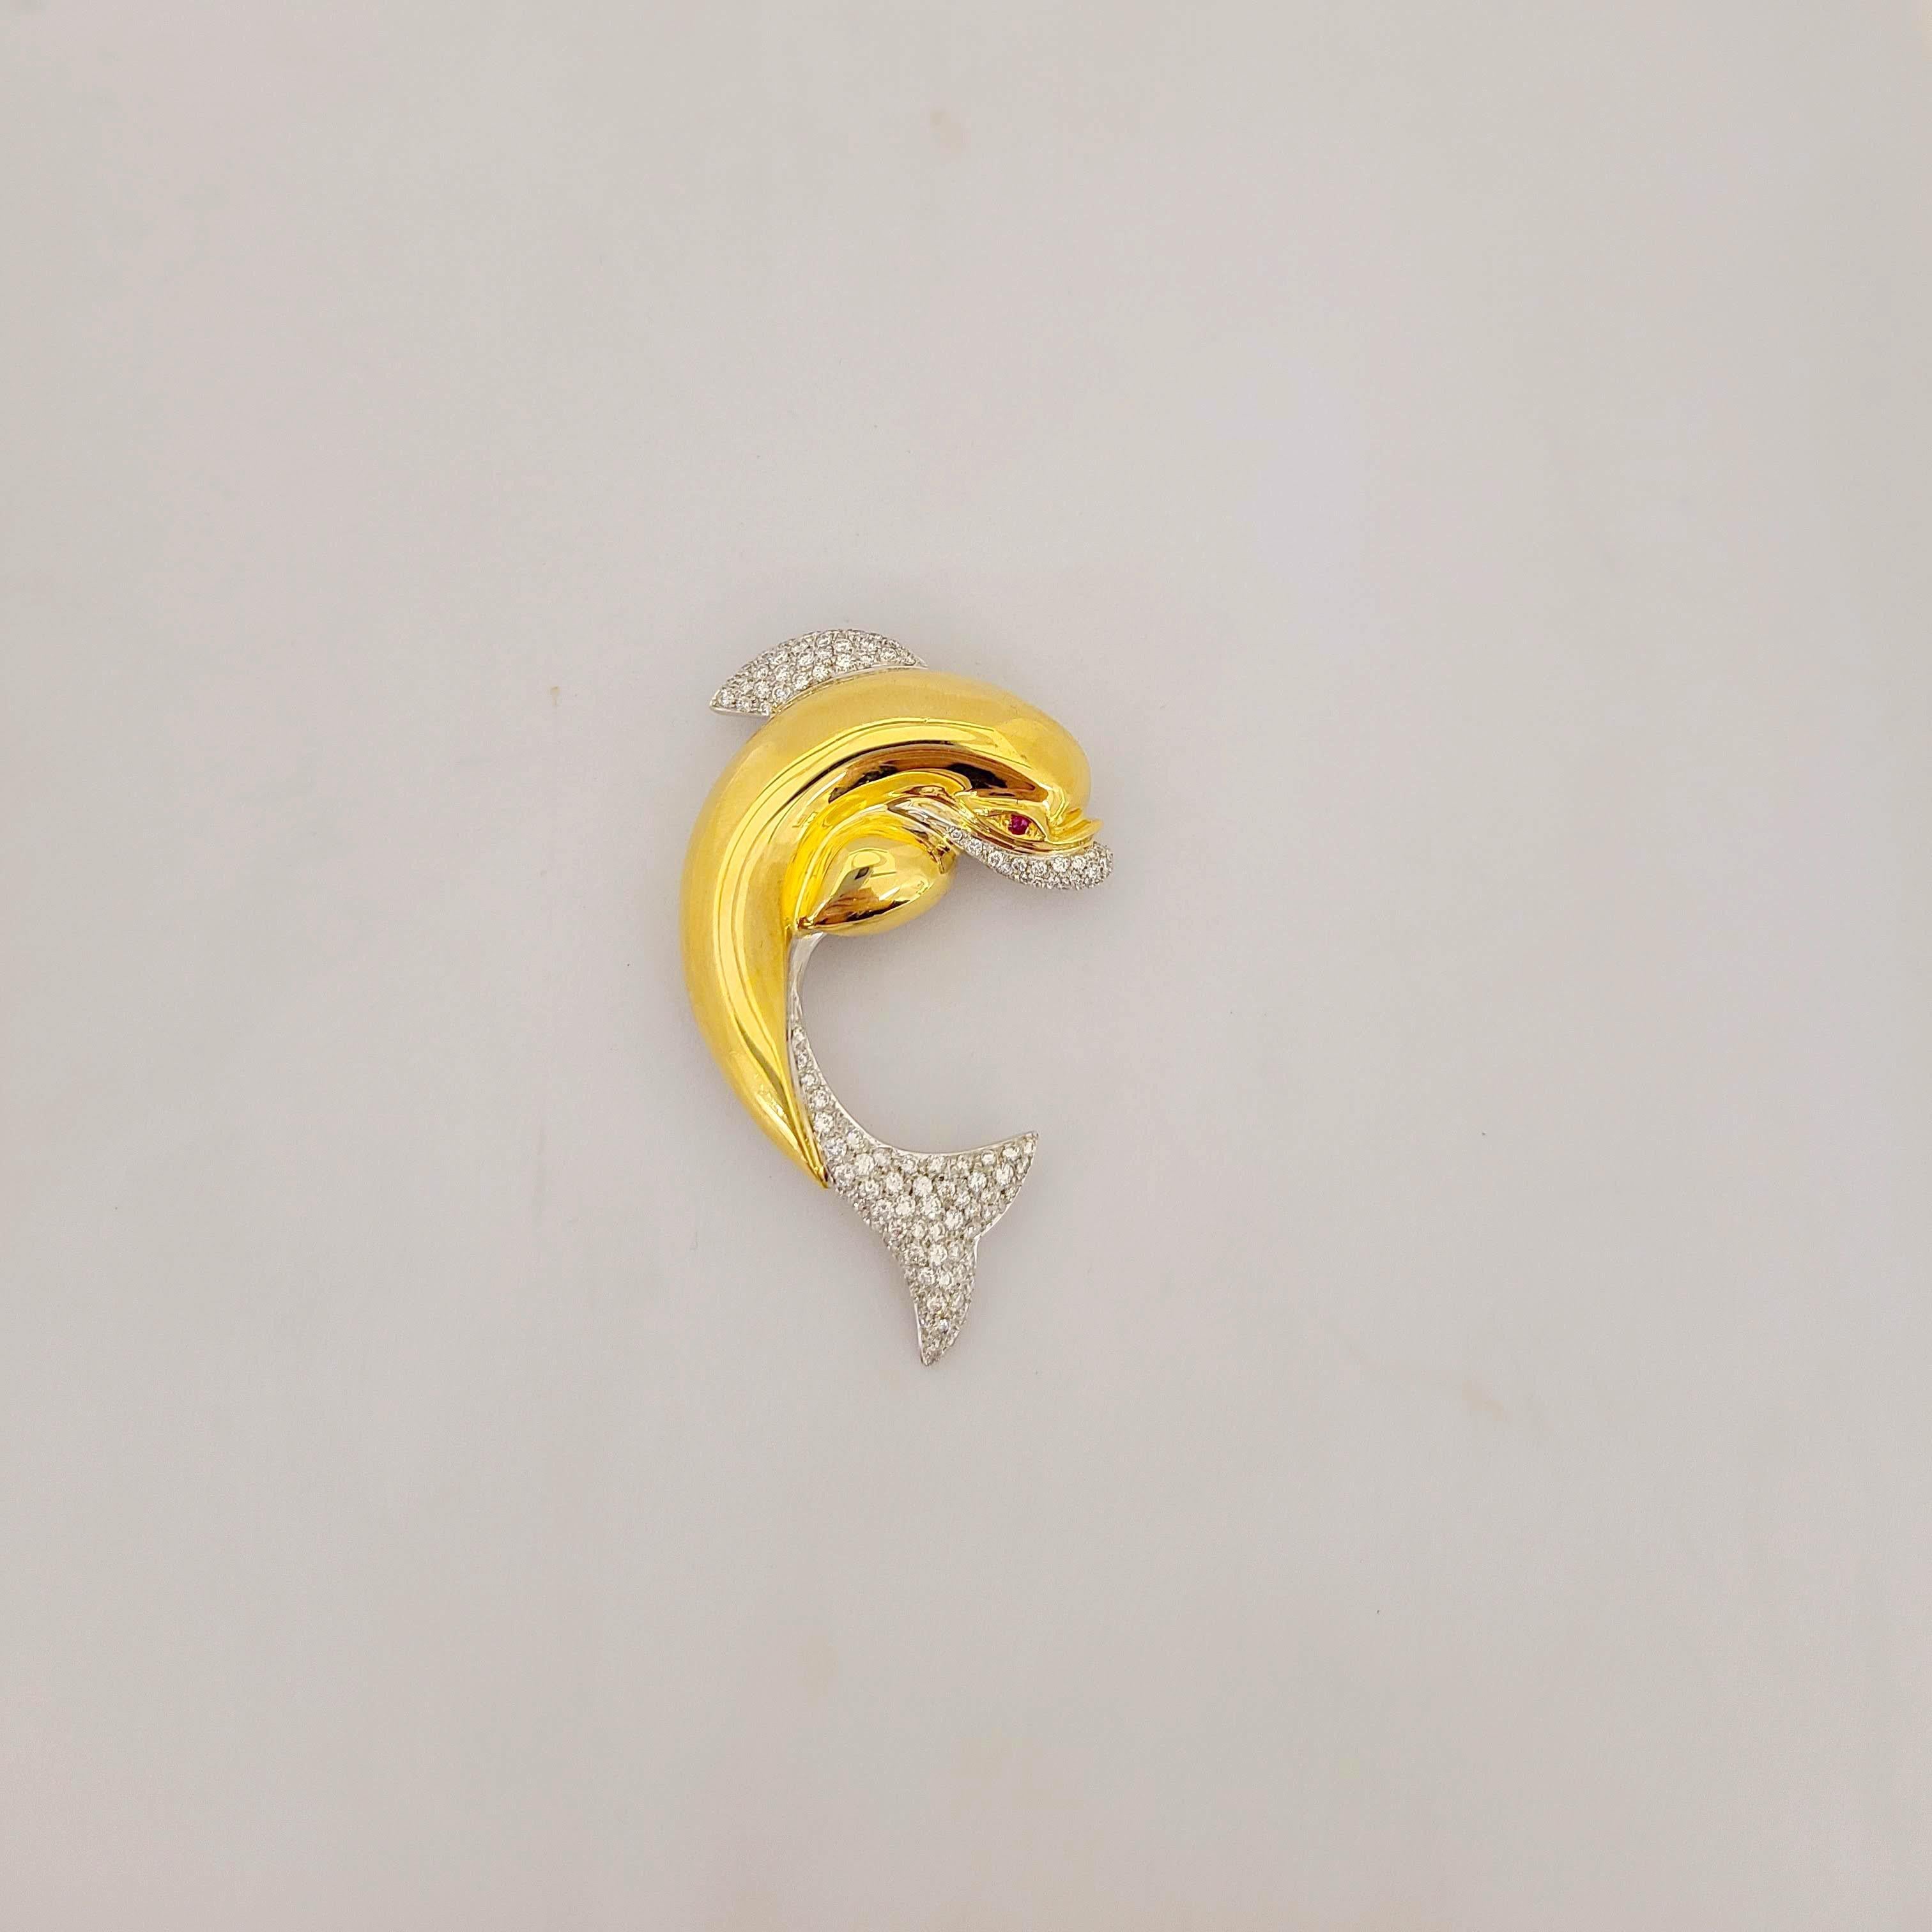 Cellini 18 karat yellow gold dolphin brooch. Designed in a hi polished yellow gold ,beautifully set with pave diamond in the tail, fin and mouth. A brilliant cut ruby is set for the eye. The dolphin measures 2